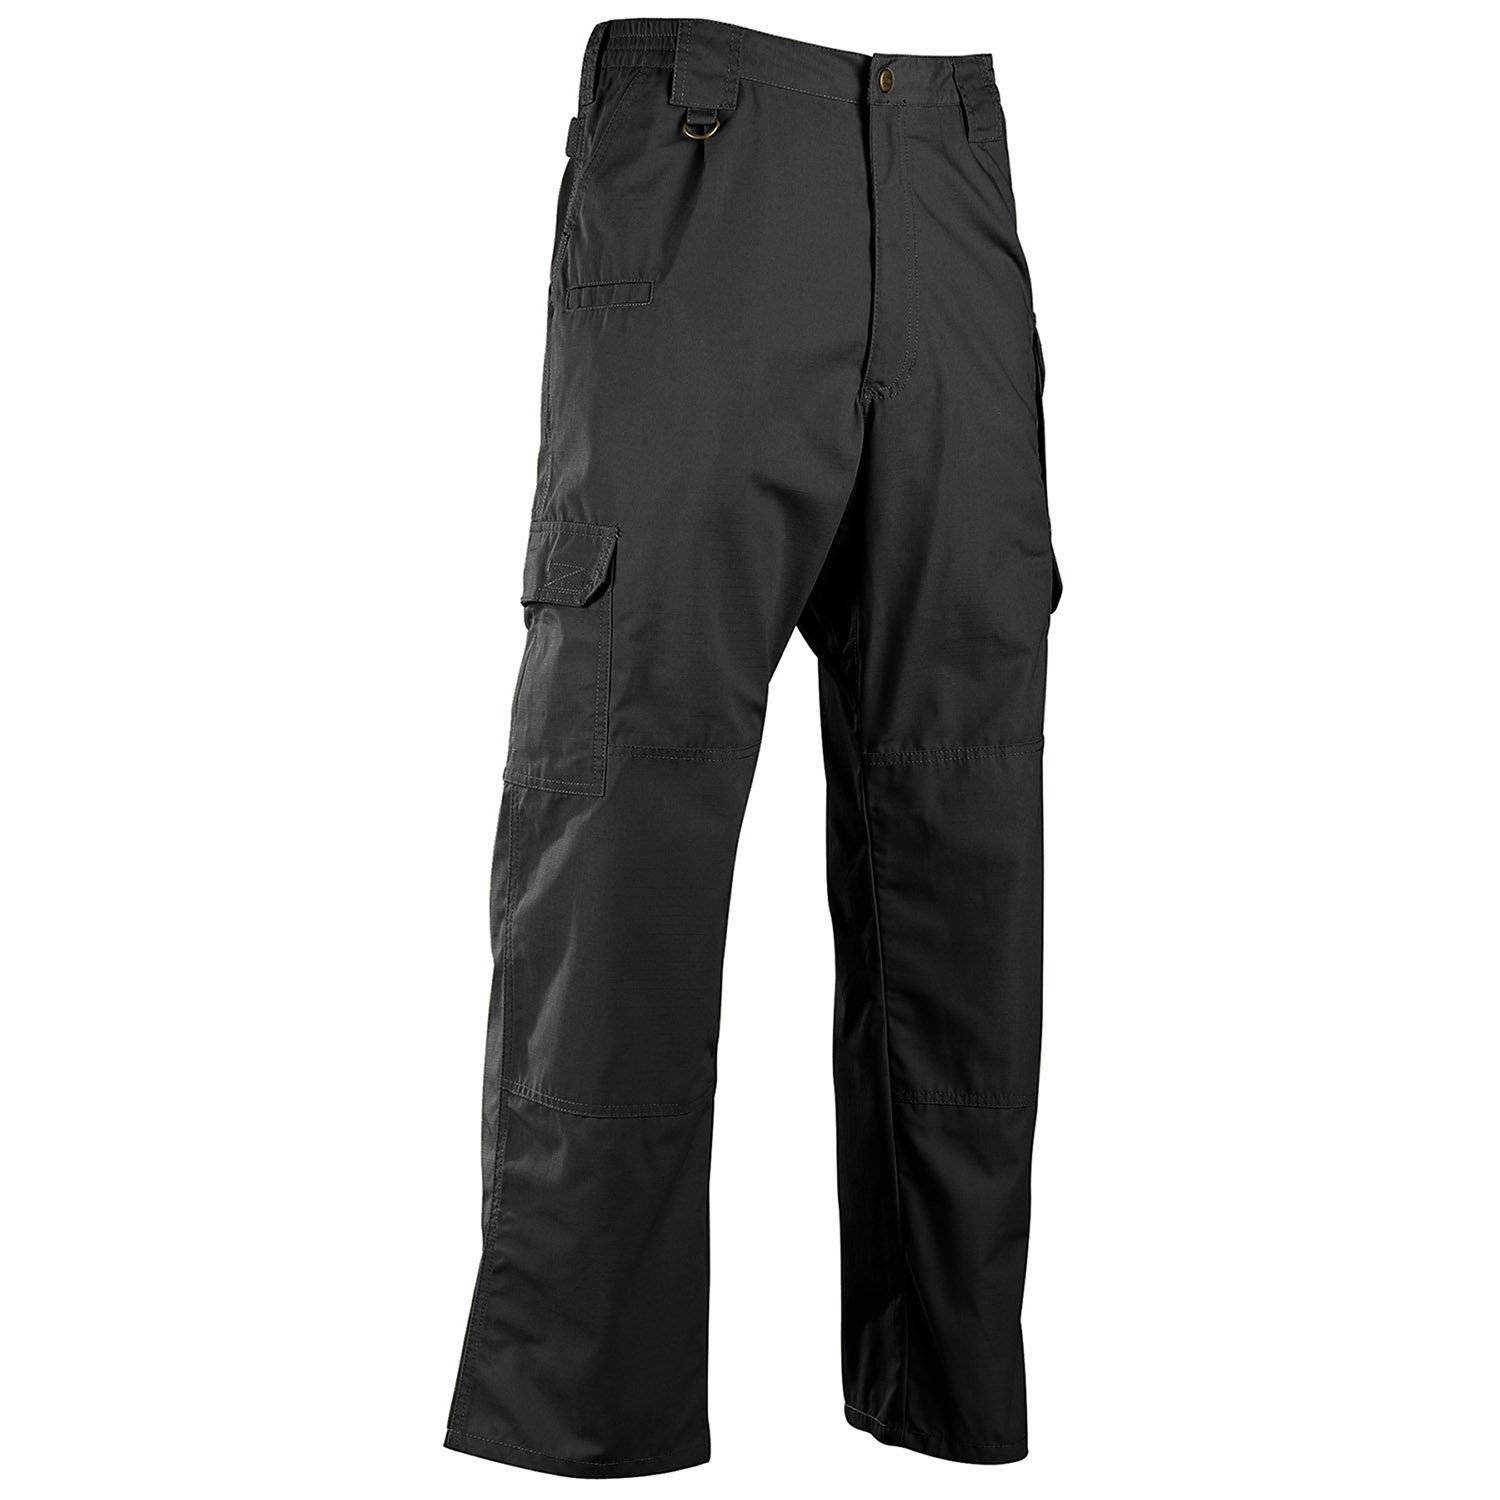 Teflon Treated 5.11 Womens Taclite Pro Tactical 7 Pocket Cargo Pant Style 64360 Rip and Water Resistant